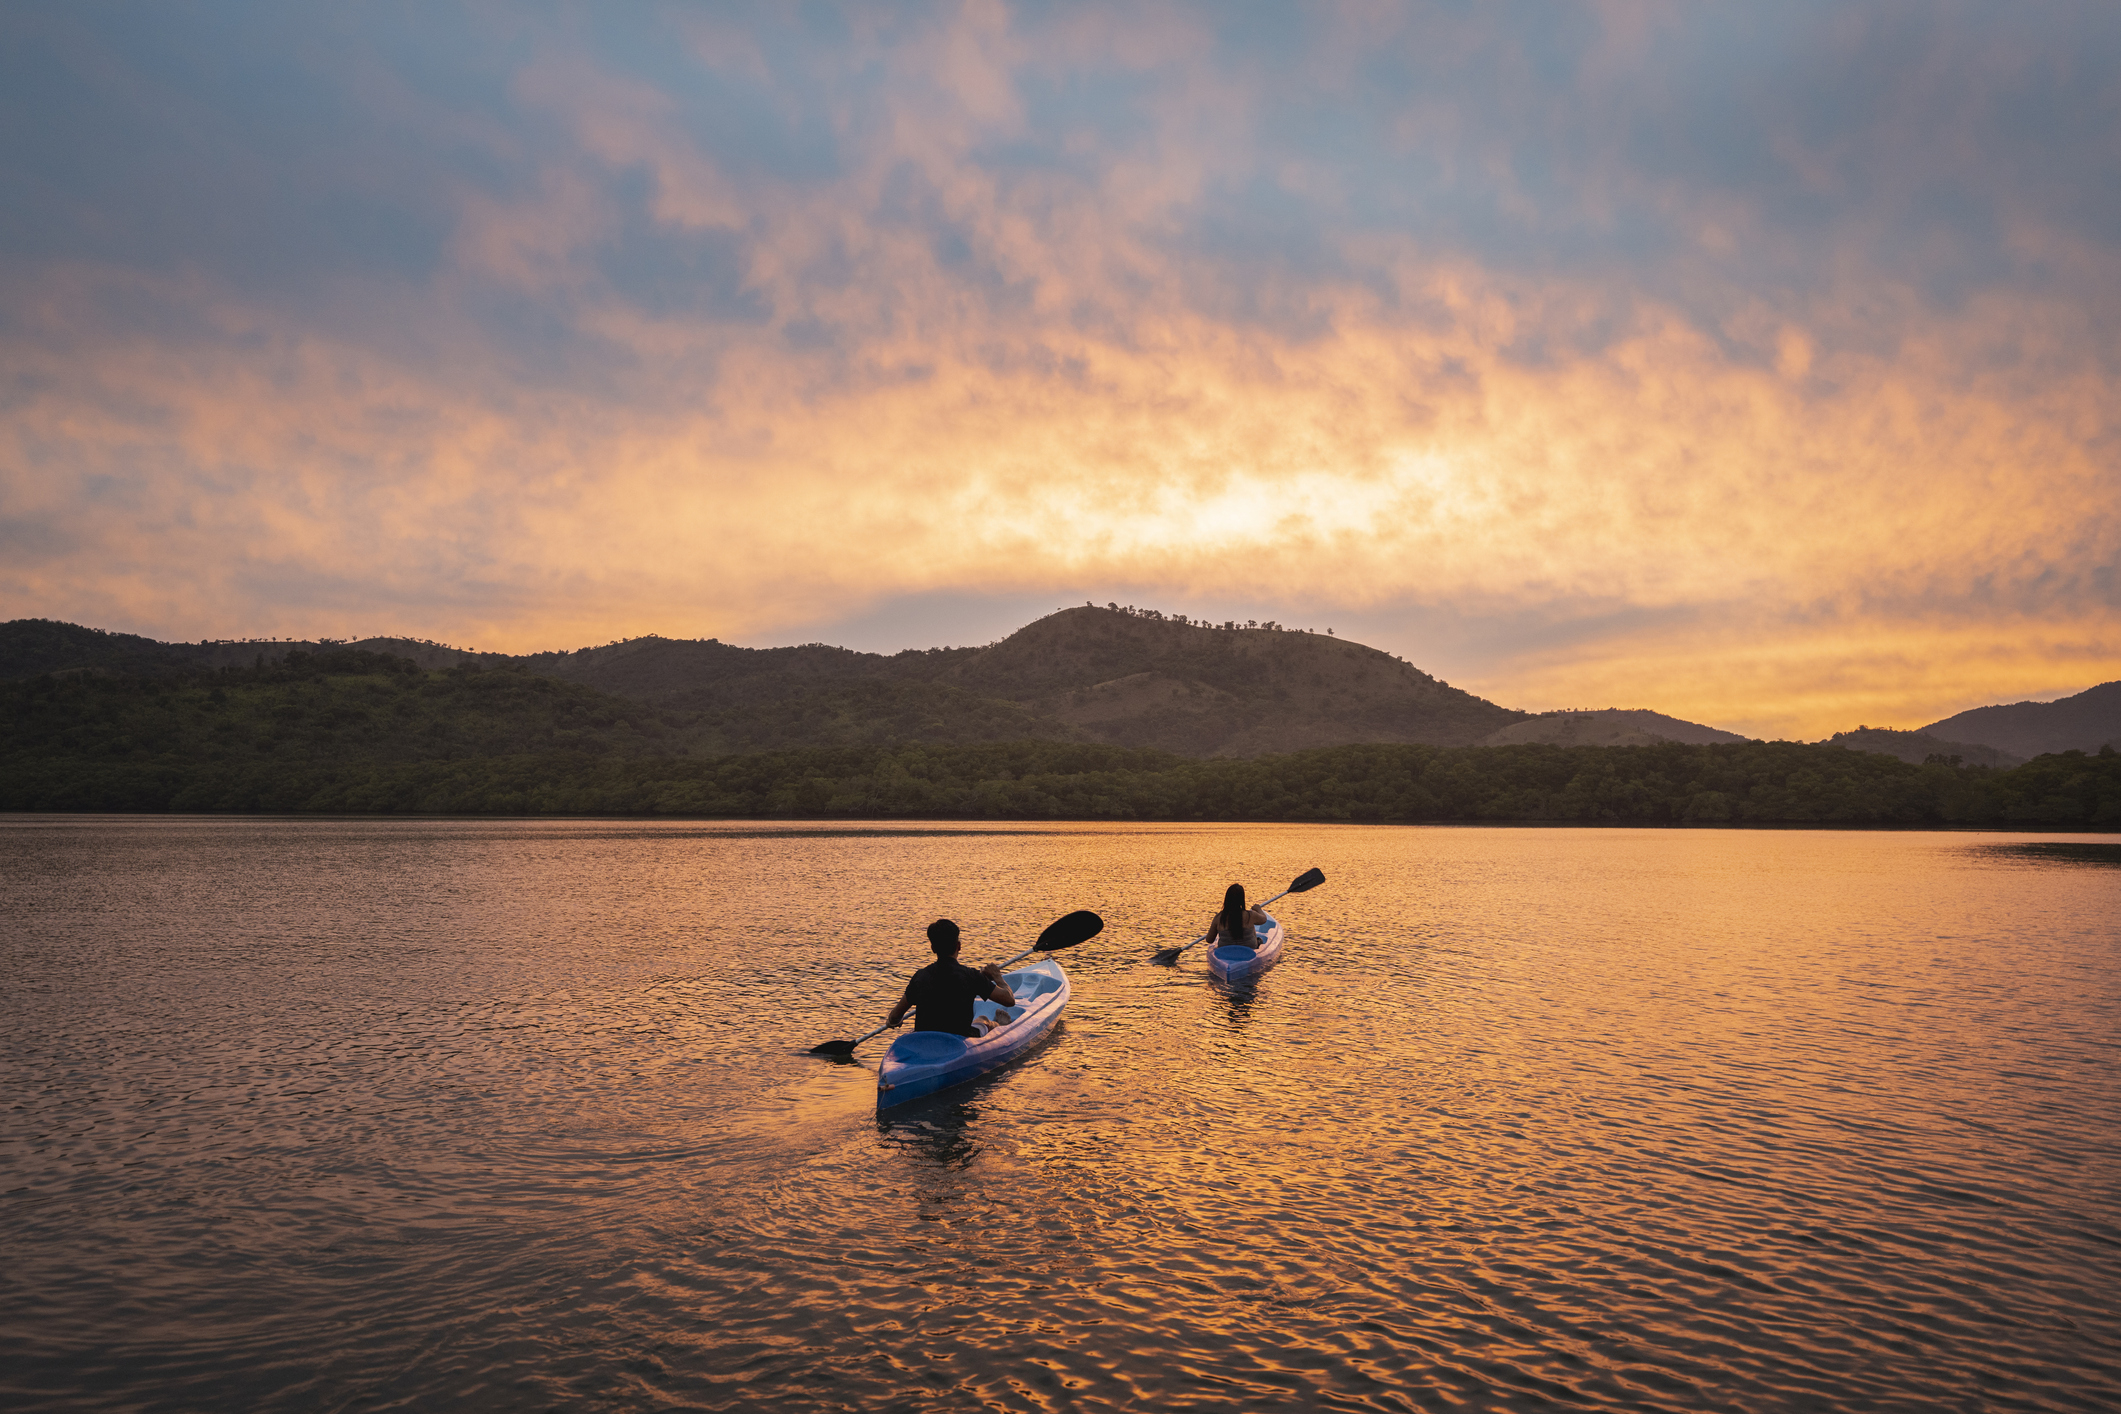 Two kayakers paddling in a large body of water at sunset